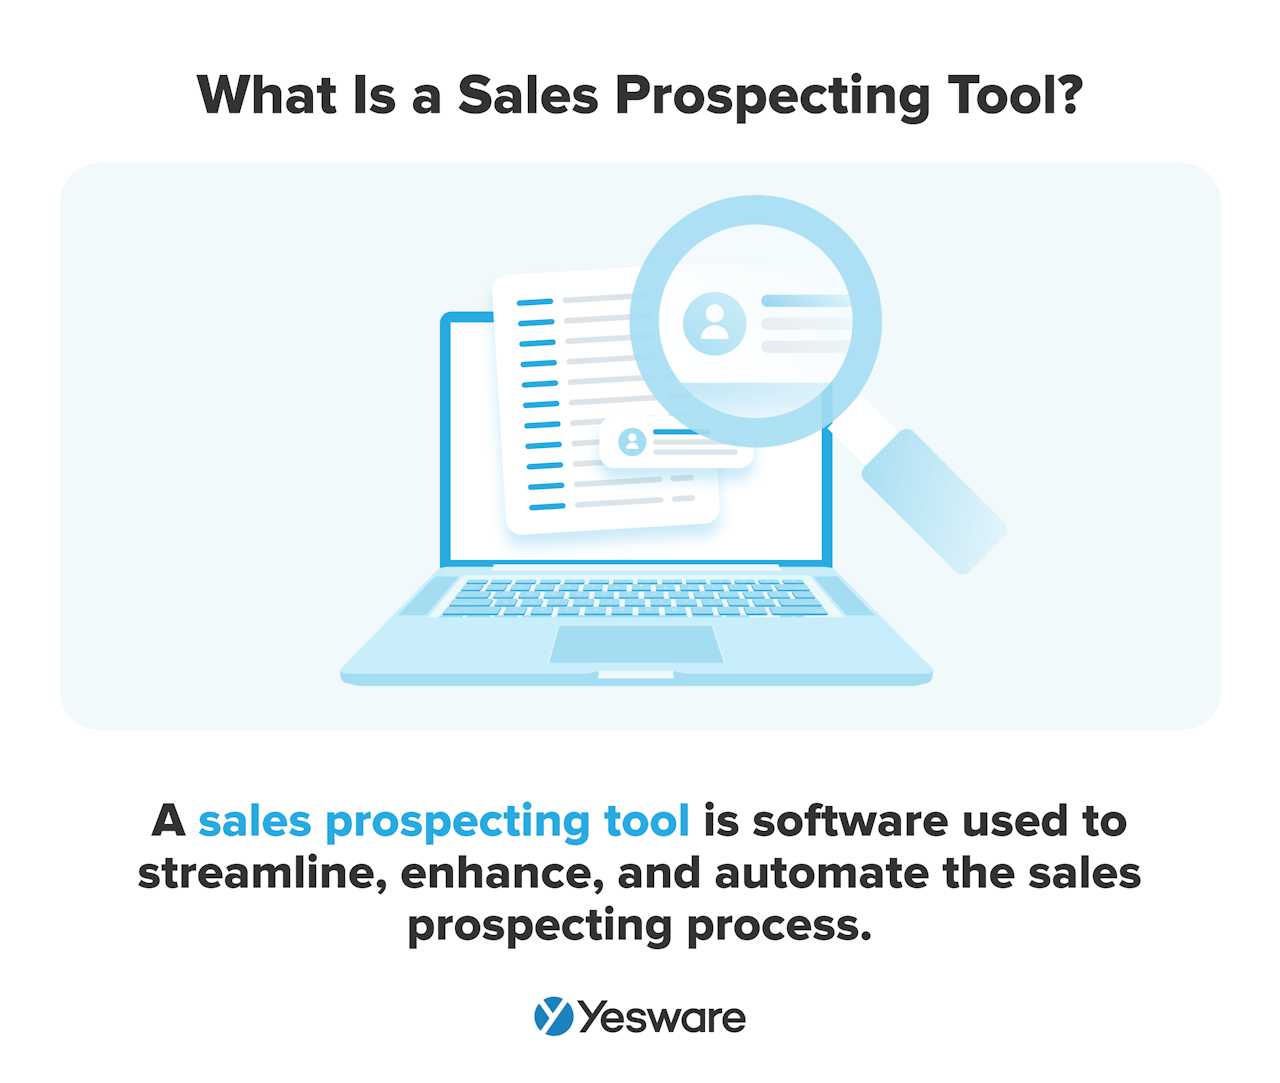 What is a sales prospecting tool?